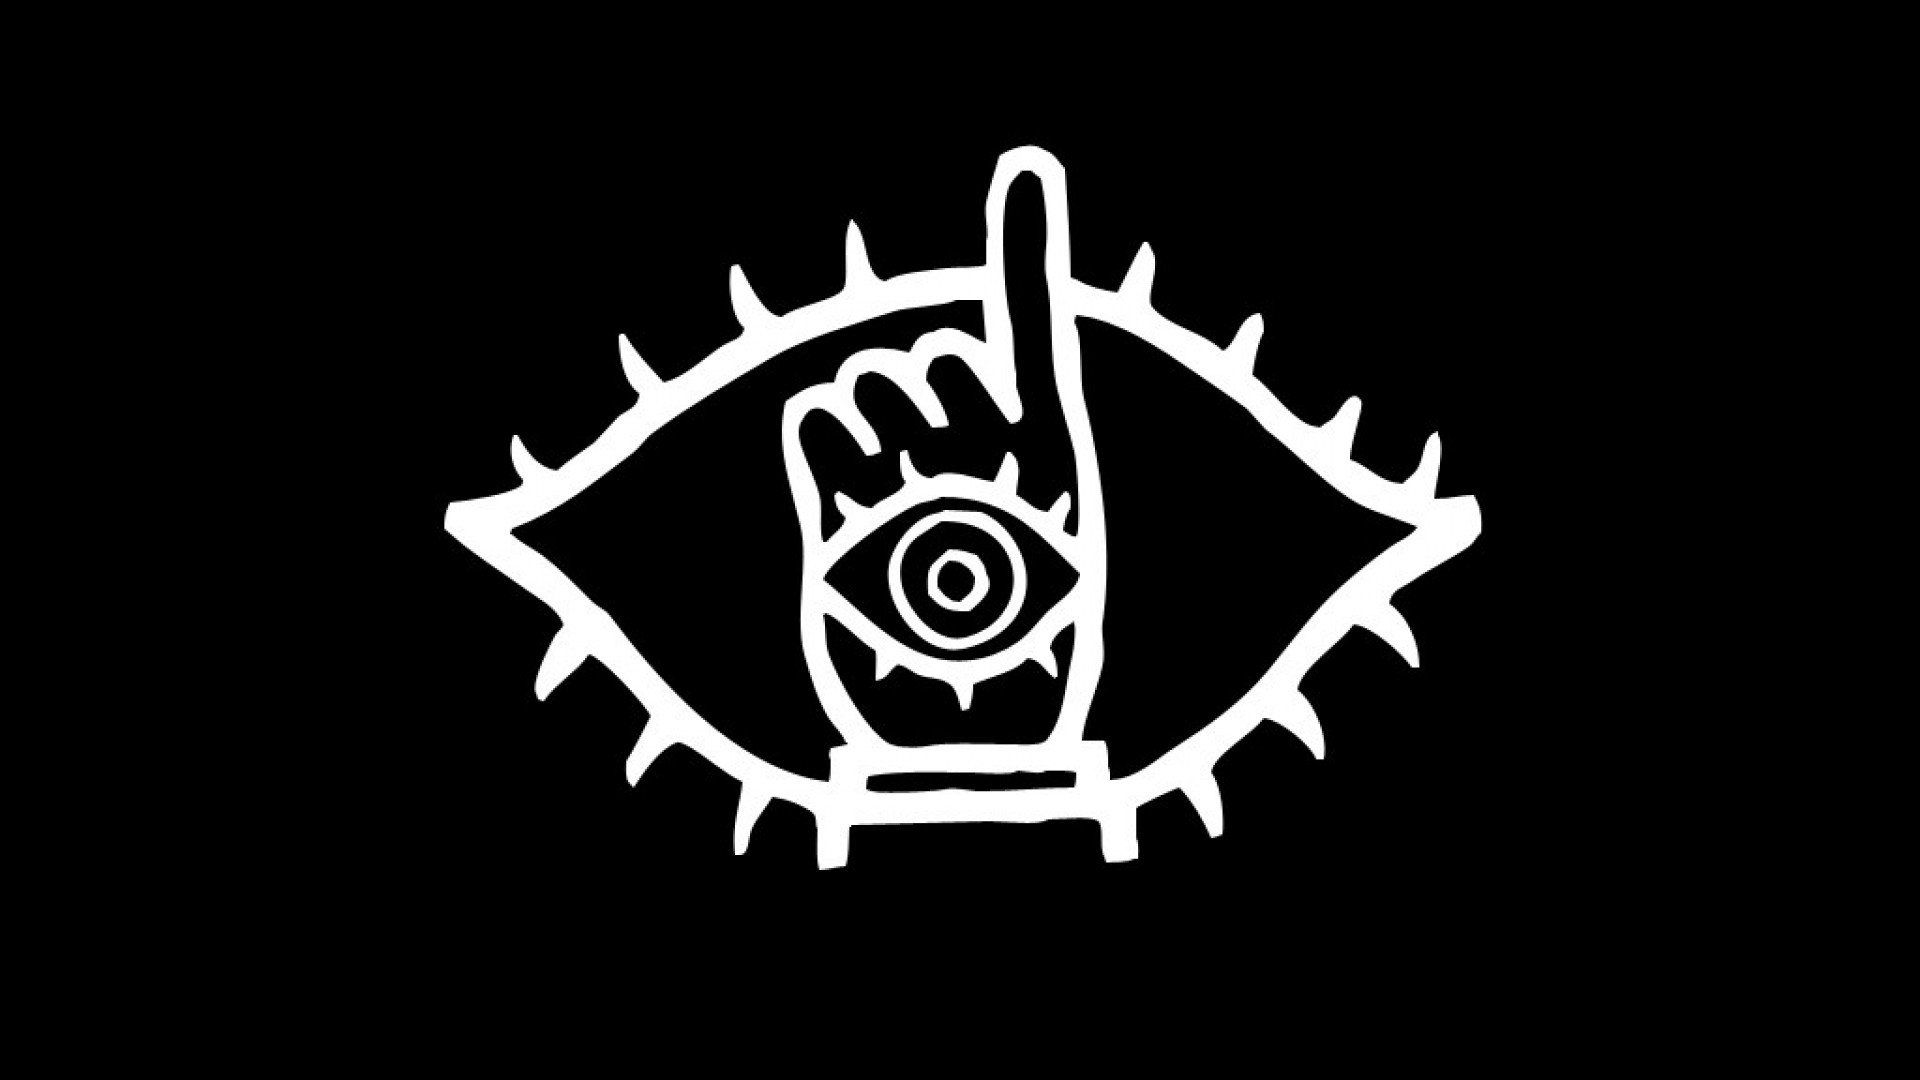 HD desktop wallpaper featuring the iconic 'Friend' symbol from 20th Century Boys manga on a black background.